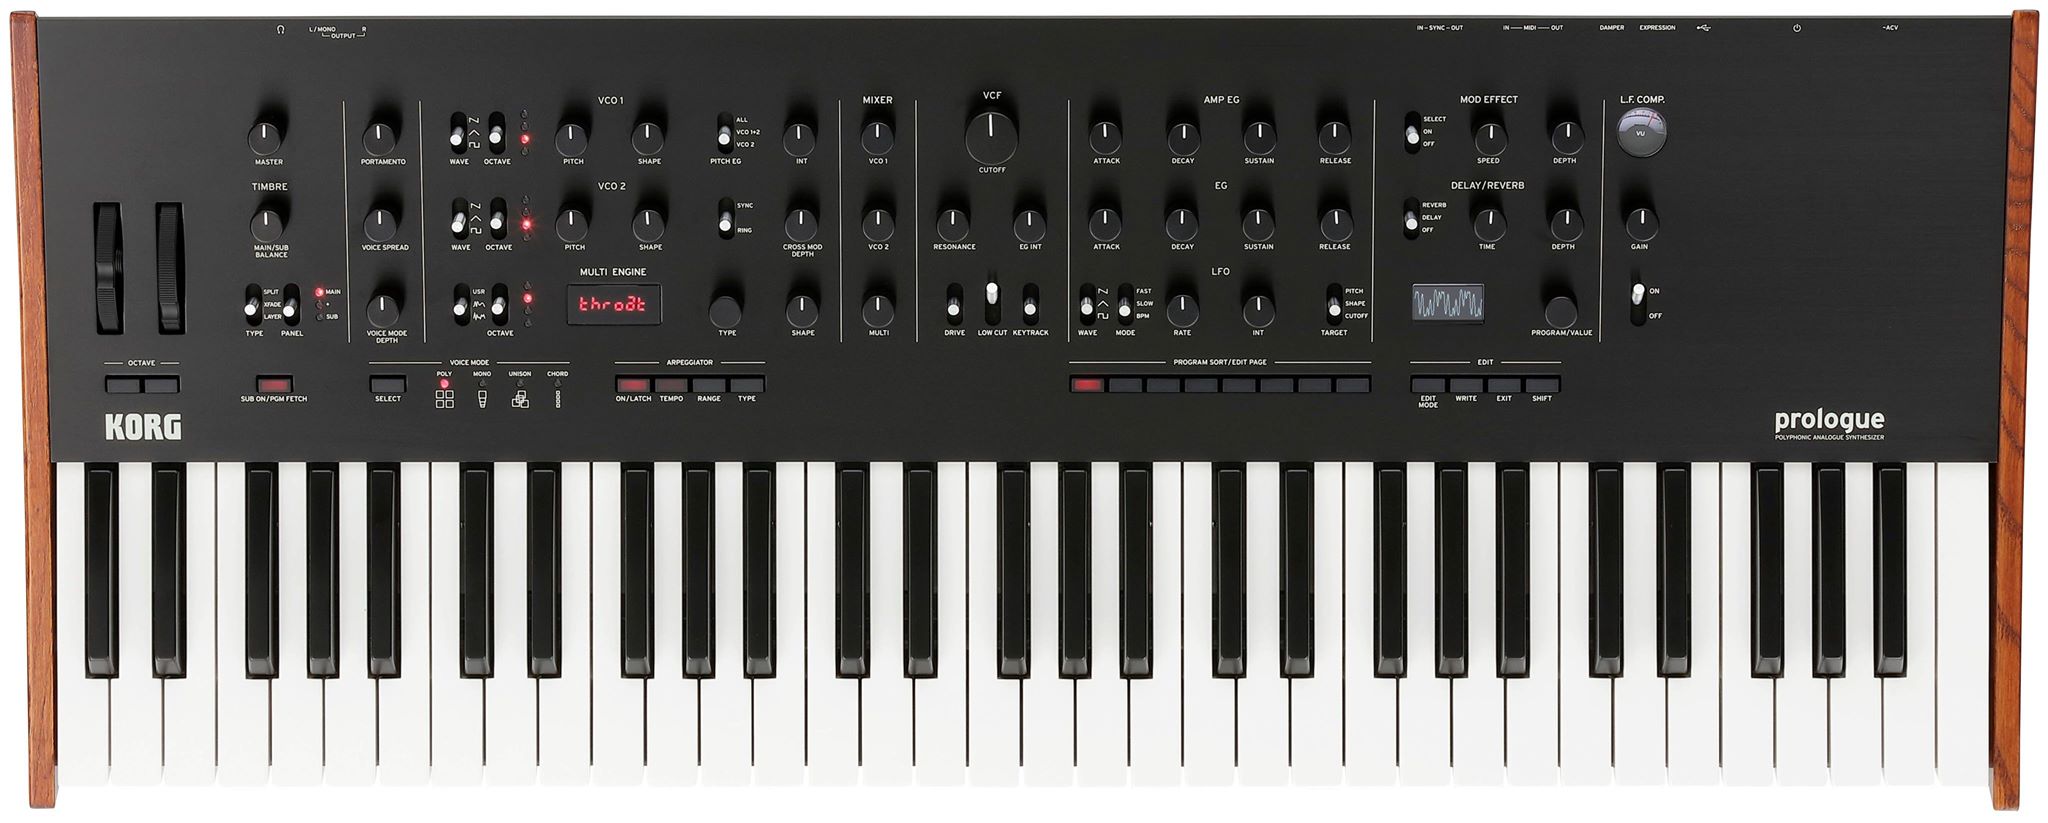 korg prologue synth